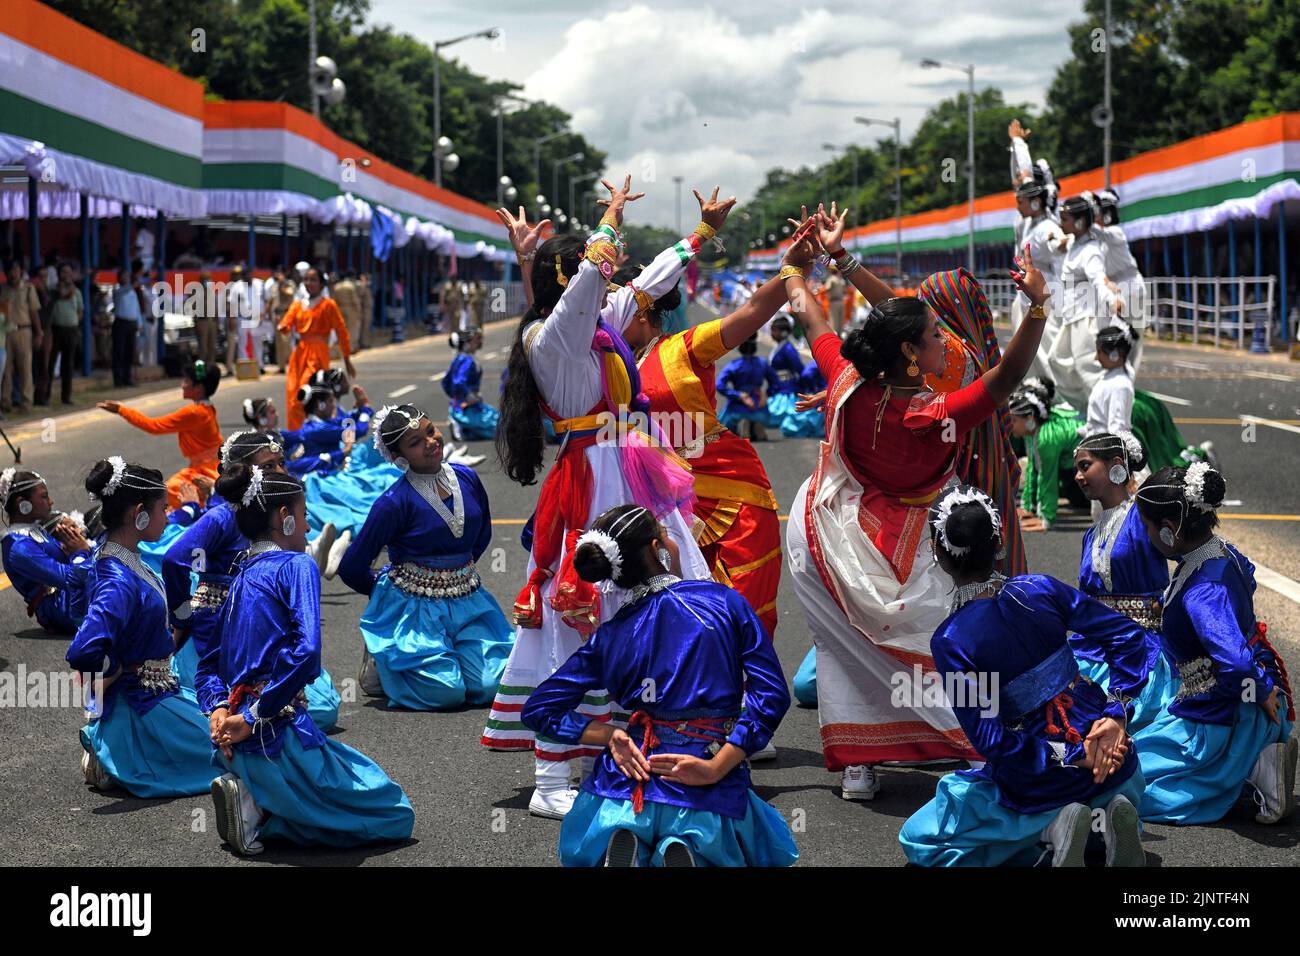 School Students seen practicing during the Independence day Final Dress Rehearsal. India prepares to celebrate the 75th Independence day on 15th August 2022 as part of the Azadi Ka Amrit Mahotsav celebration. Stock Photo